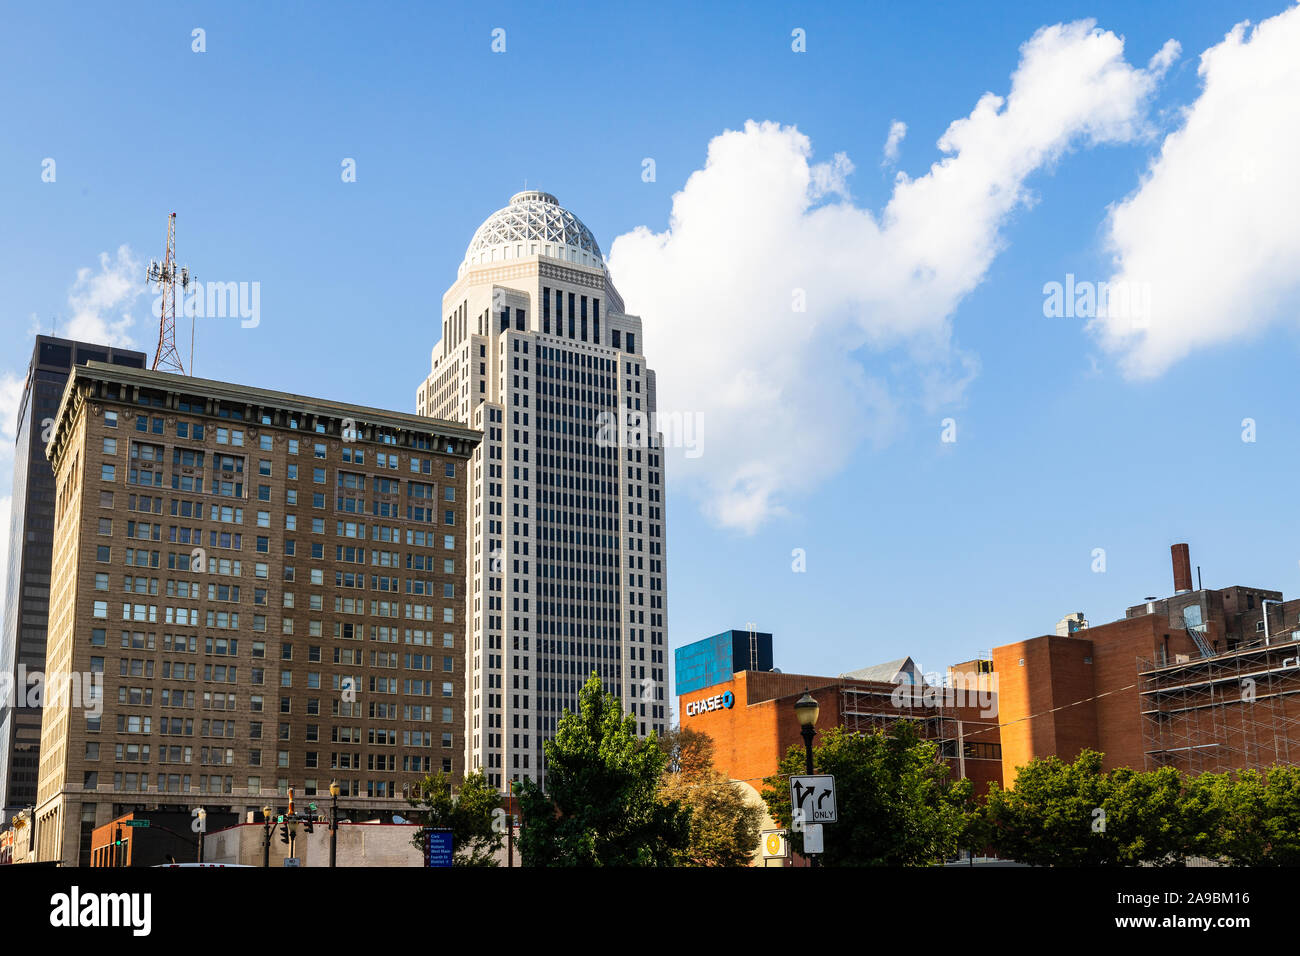 West Market is one of the most famous landmarks in the downtown Louisville area with its beautiful 35-story architecture by John Burgee. Stock Photo